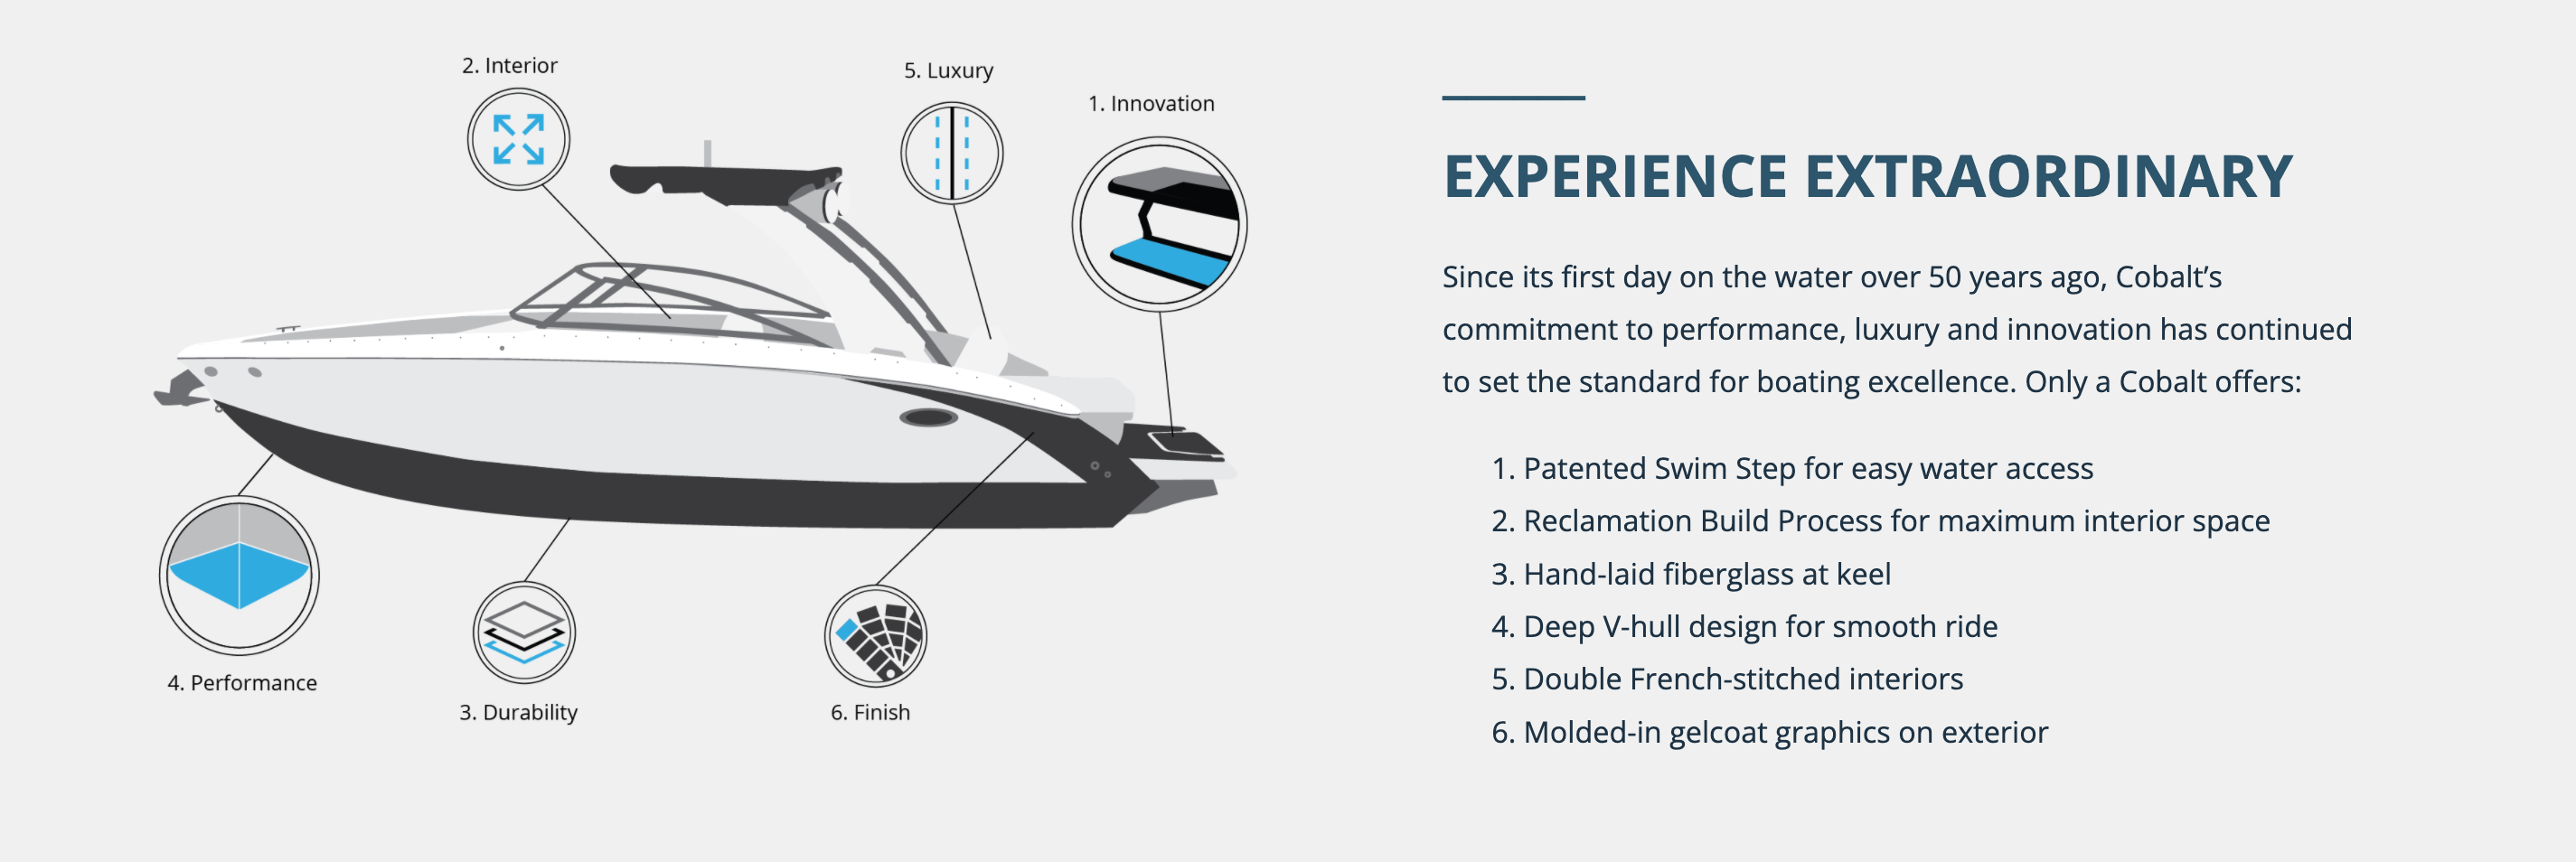 Drawn Diagram of Cobalt Boats Showing Their 7 Factors To Performance, innovation & luxury.